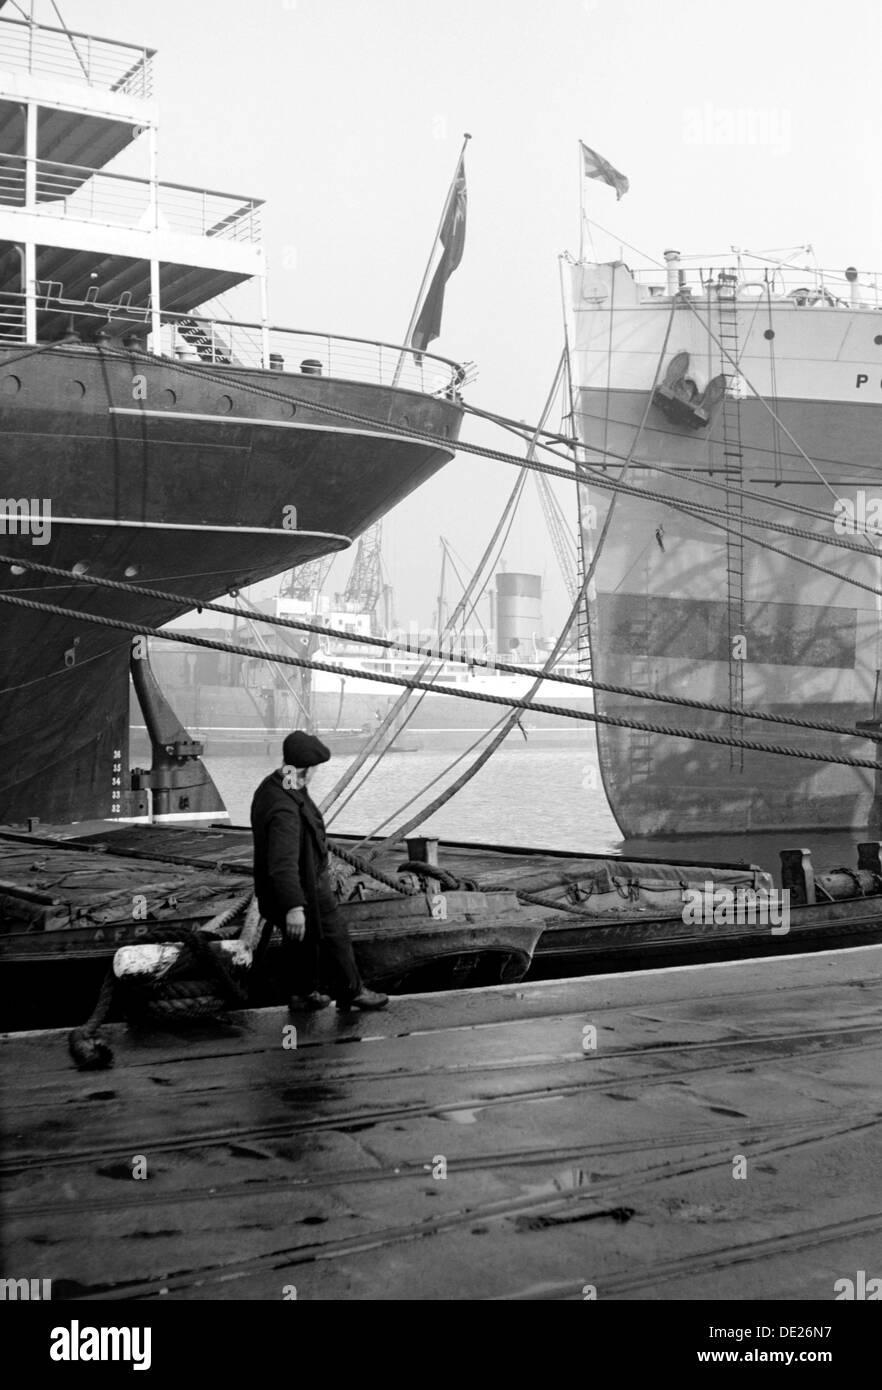 Ships berthed at the Royal Albert Dock, Canning Town, London, c1945-c1965. Artist: SW Rawlings Stock Photo